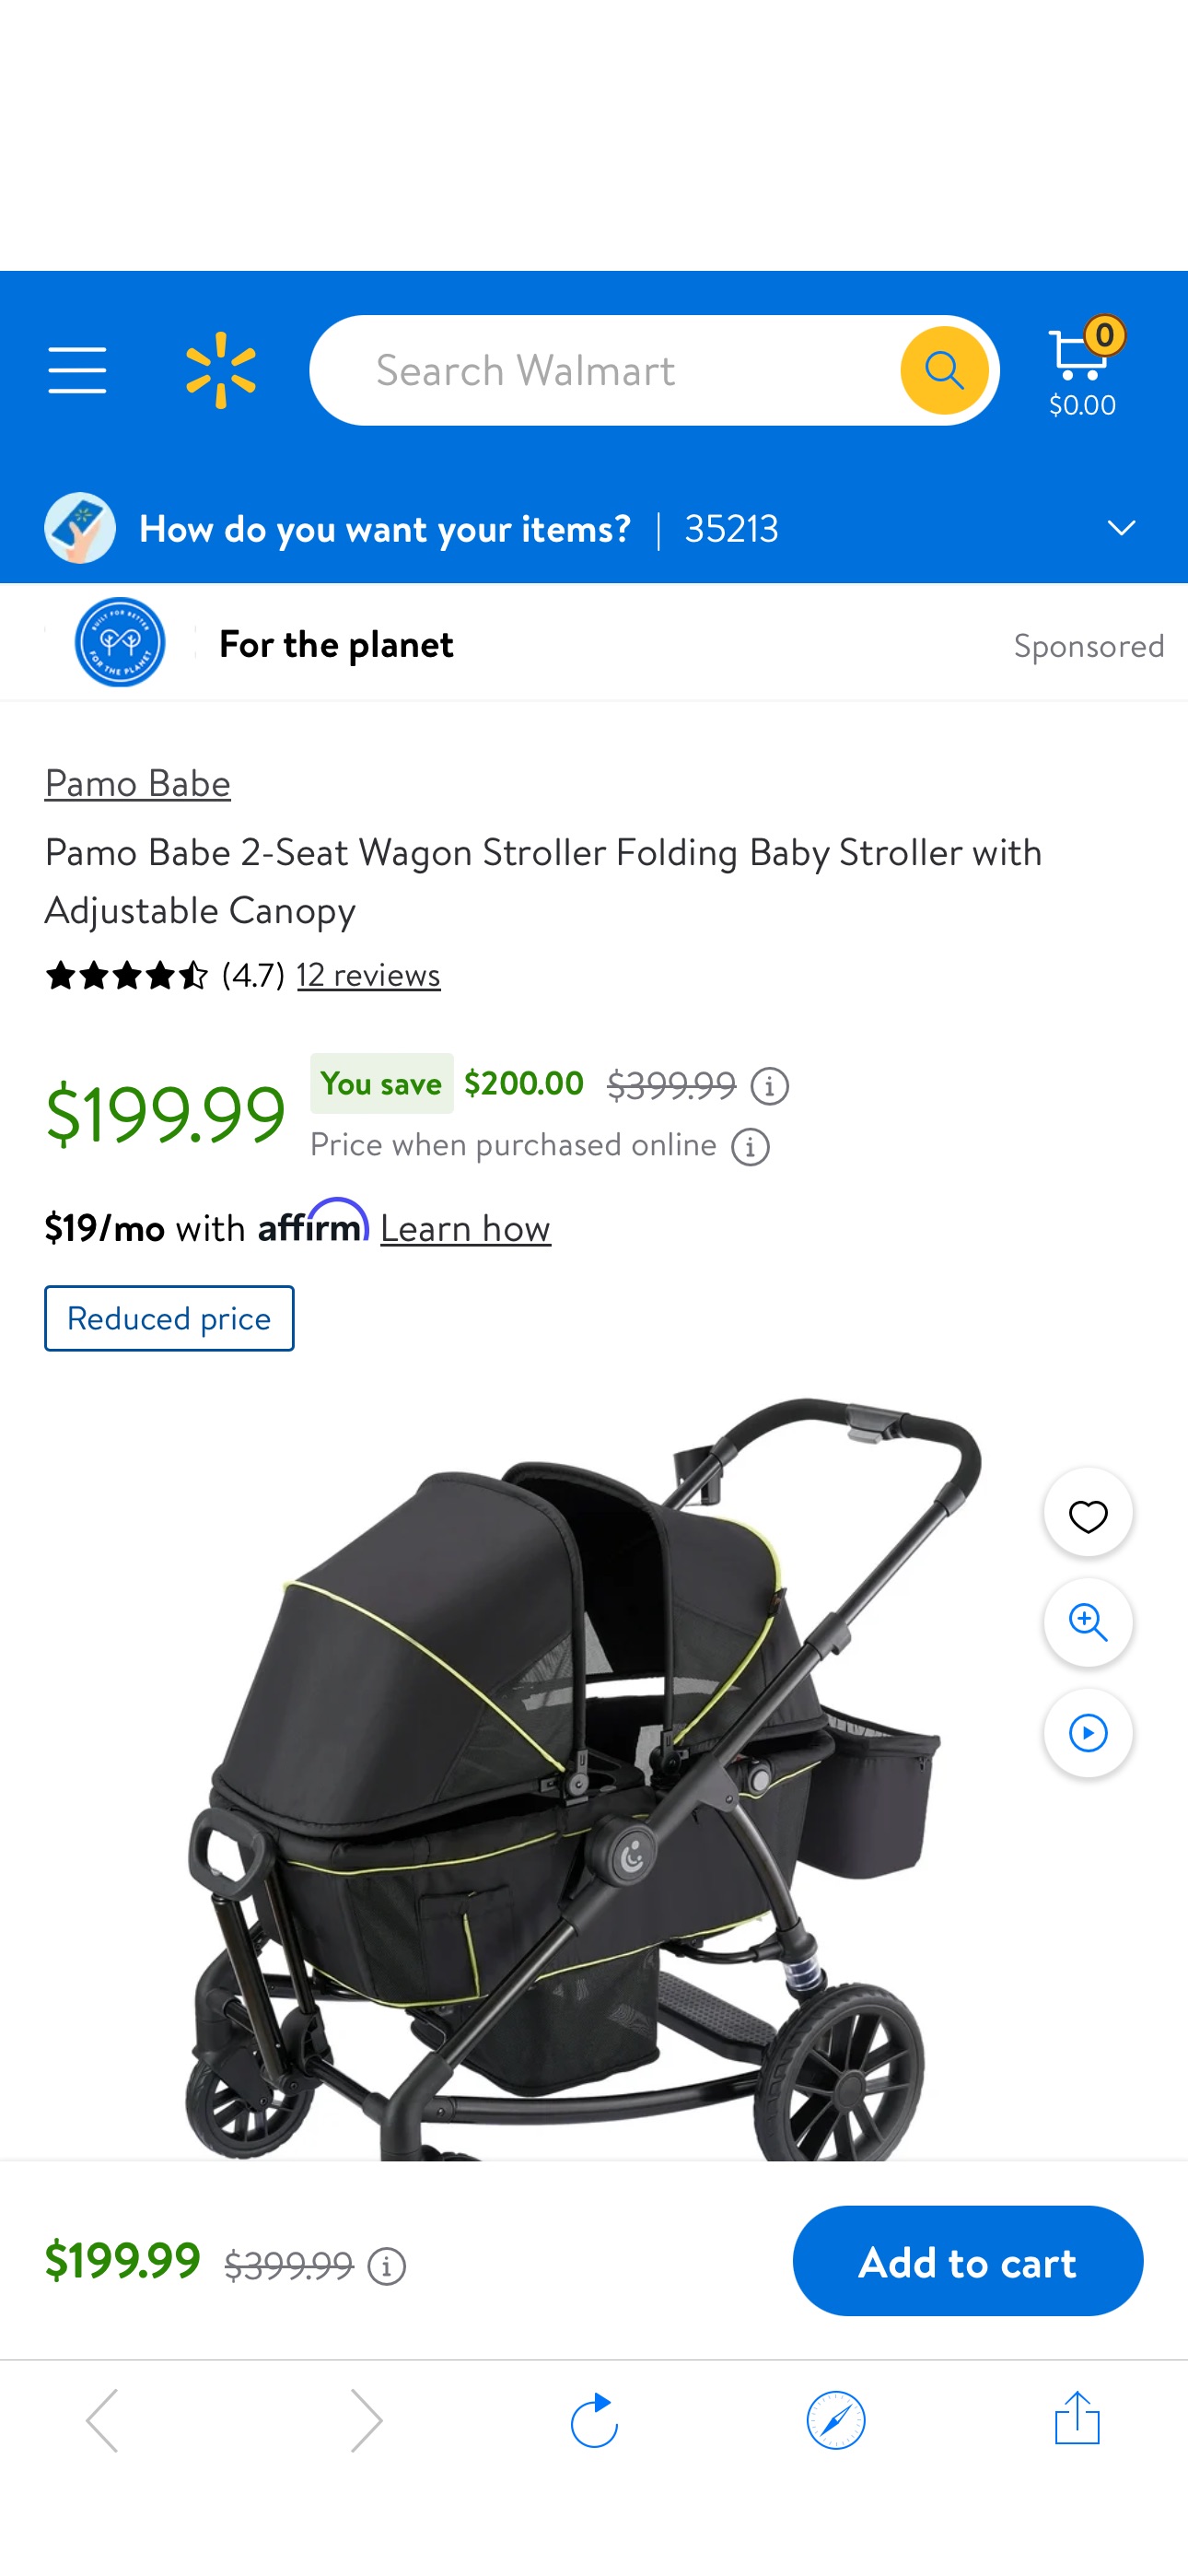 Pamo Babe 2-Seat Wagon Stroller Folding Baby Stroller with Adjustable Canopy - Walmart.com